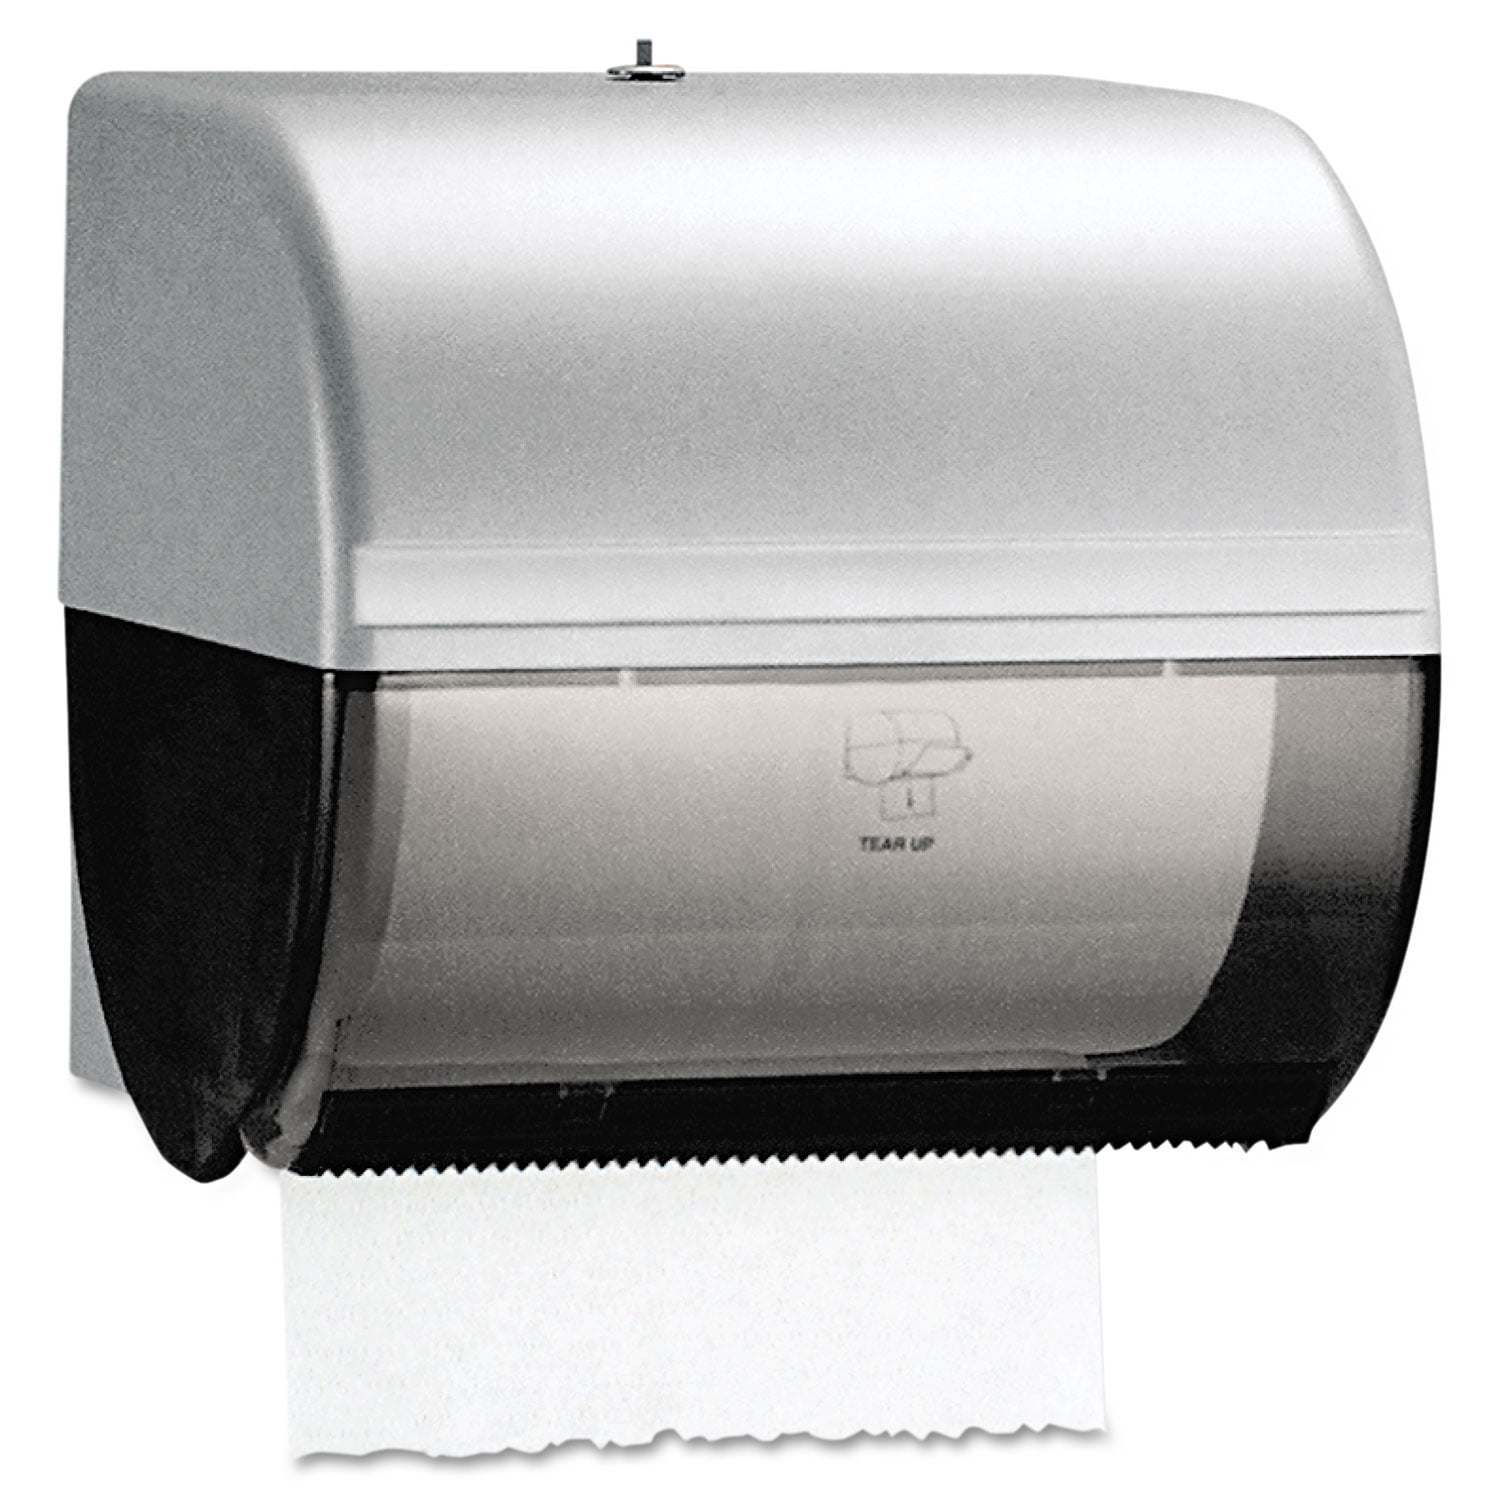 Kimberly-Clark Professional Sanitouch Manual Hard Roll Towel Dispenser Black for sale online 